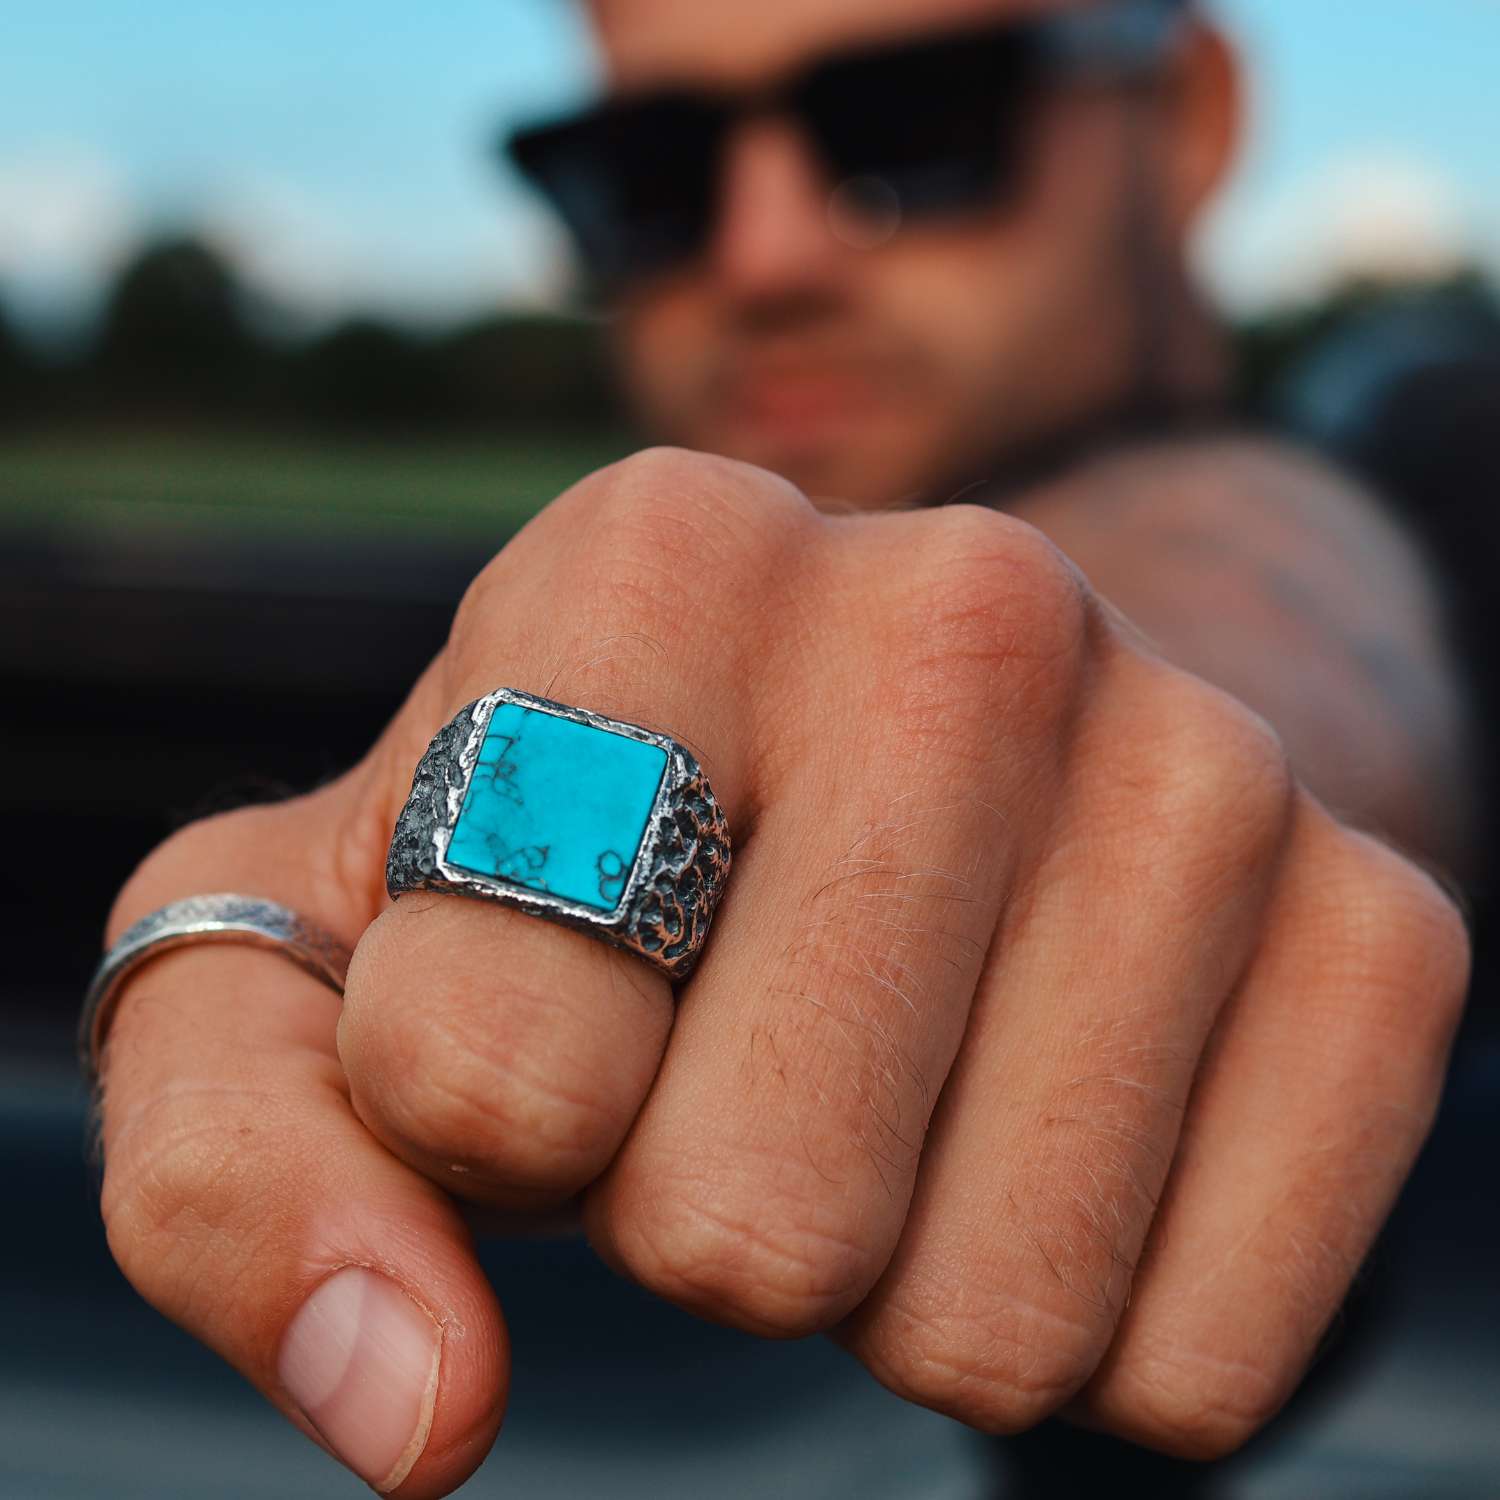 TURQUOISE RING. - 925 Silver Turquoise Stone Ring 15mm - PALM. | Handcrafted Jewelry-